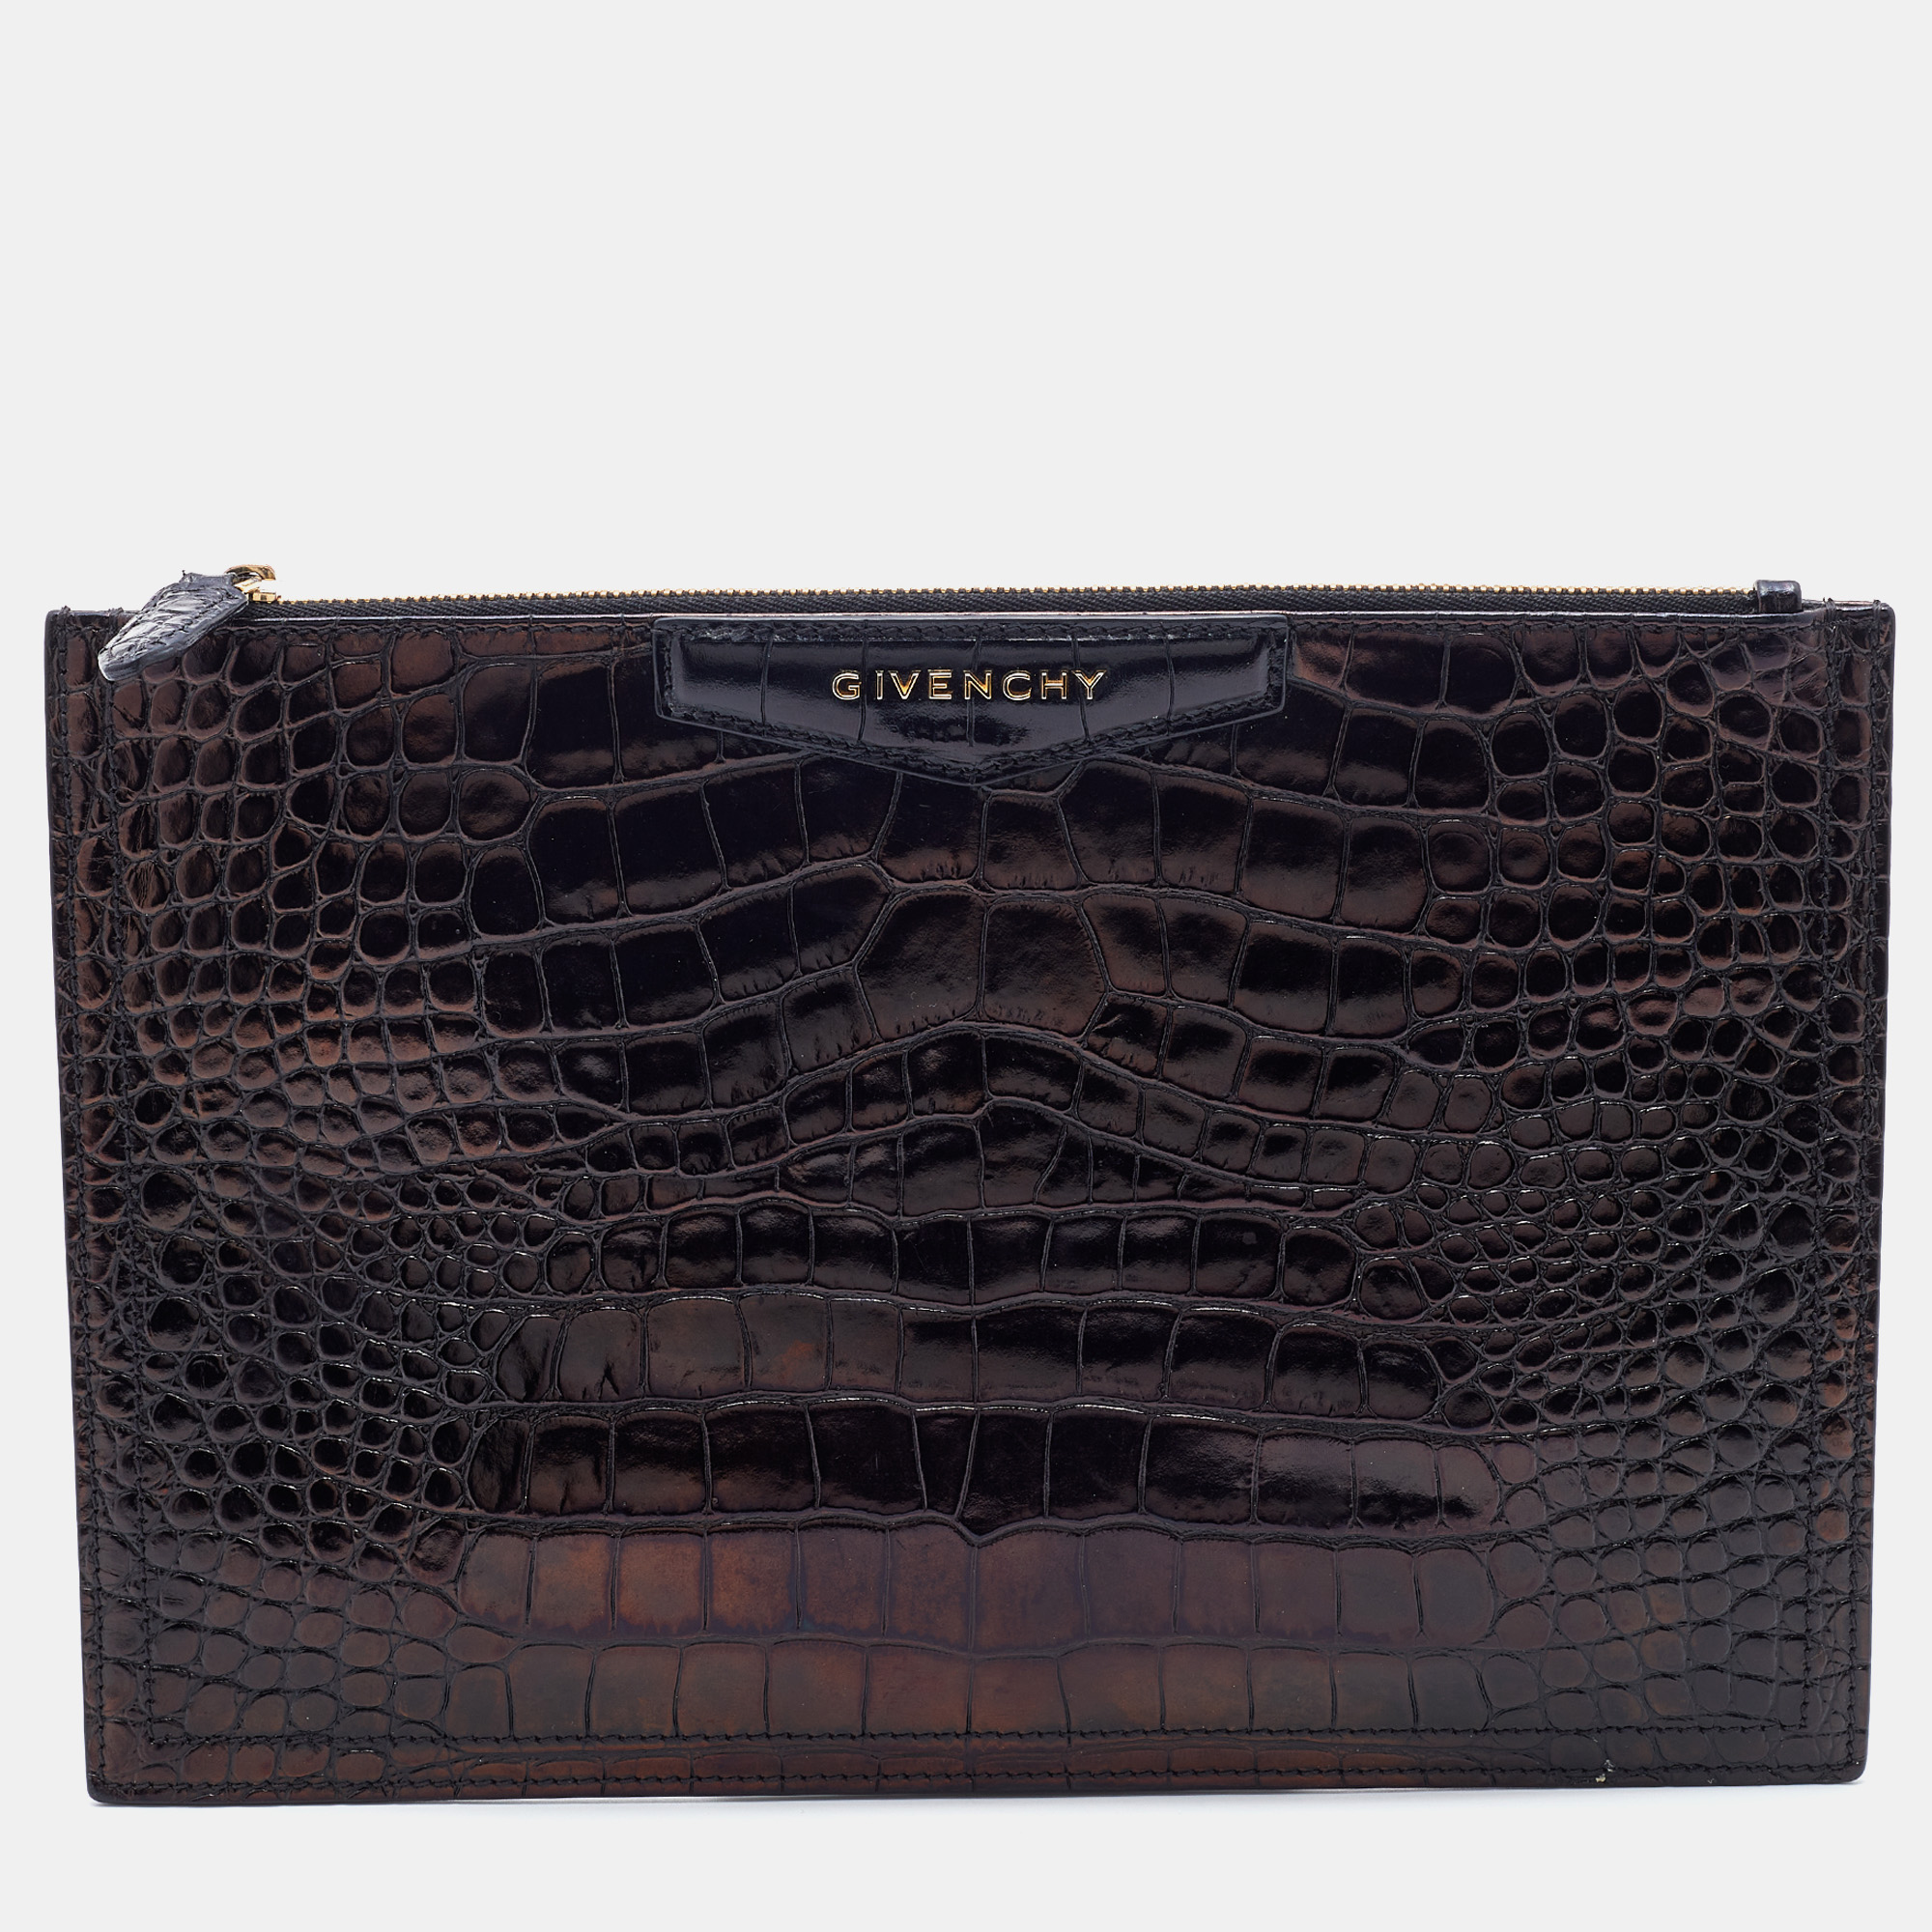 Pre-owned Givenchy Dark Brown Croc Embossed Leather Antigona Clutch